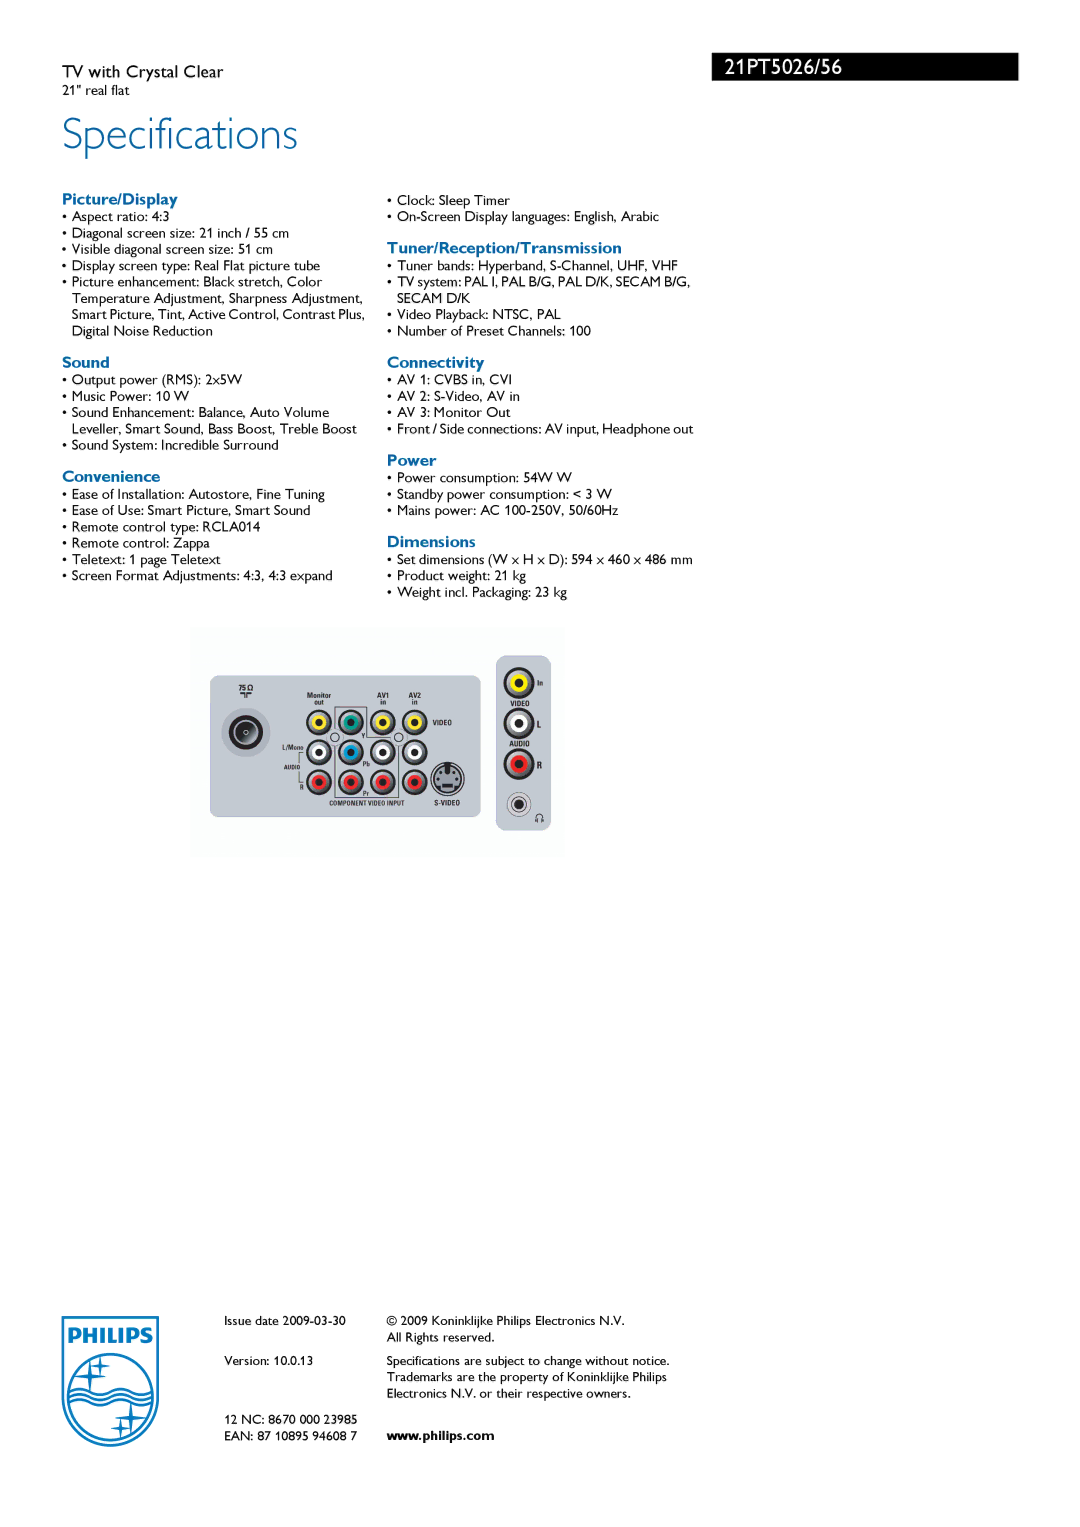 Philips 21PT5026/56 manual Specifications 